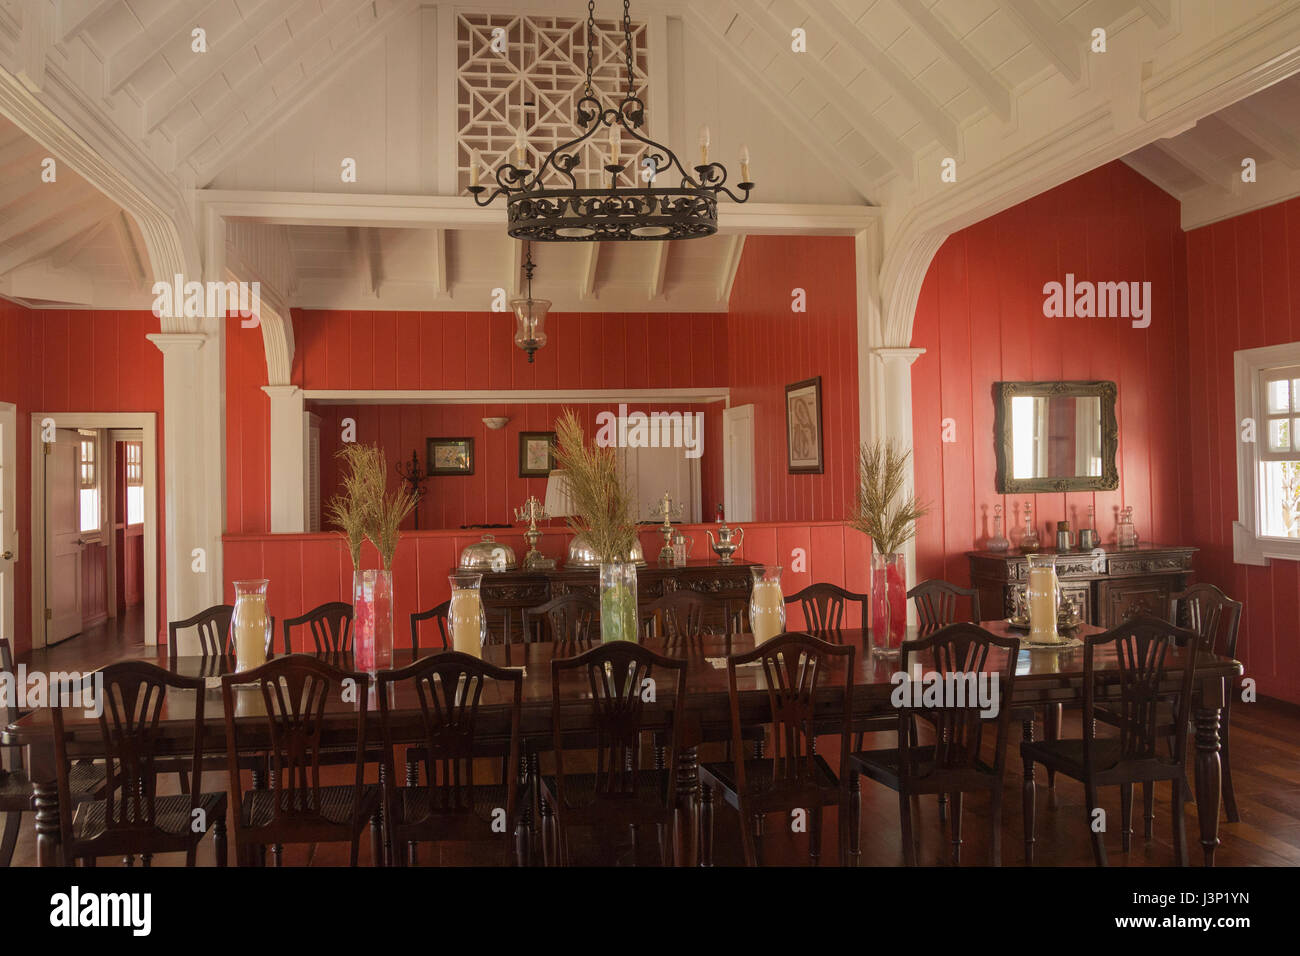 Interior Great Fairview Estate House dining room Stock Photo